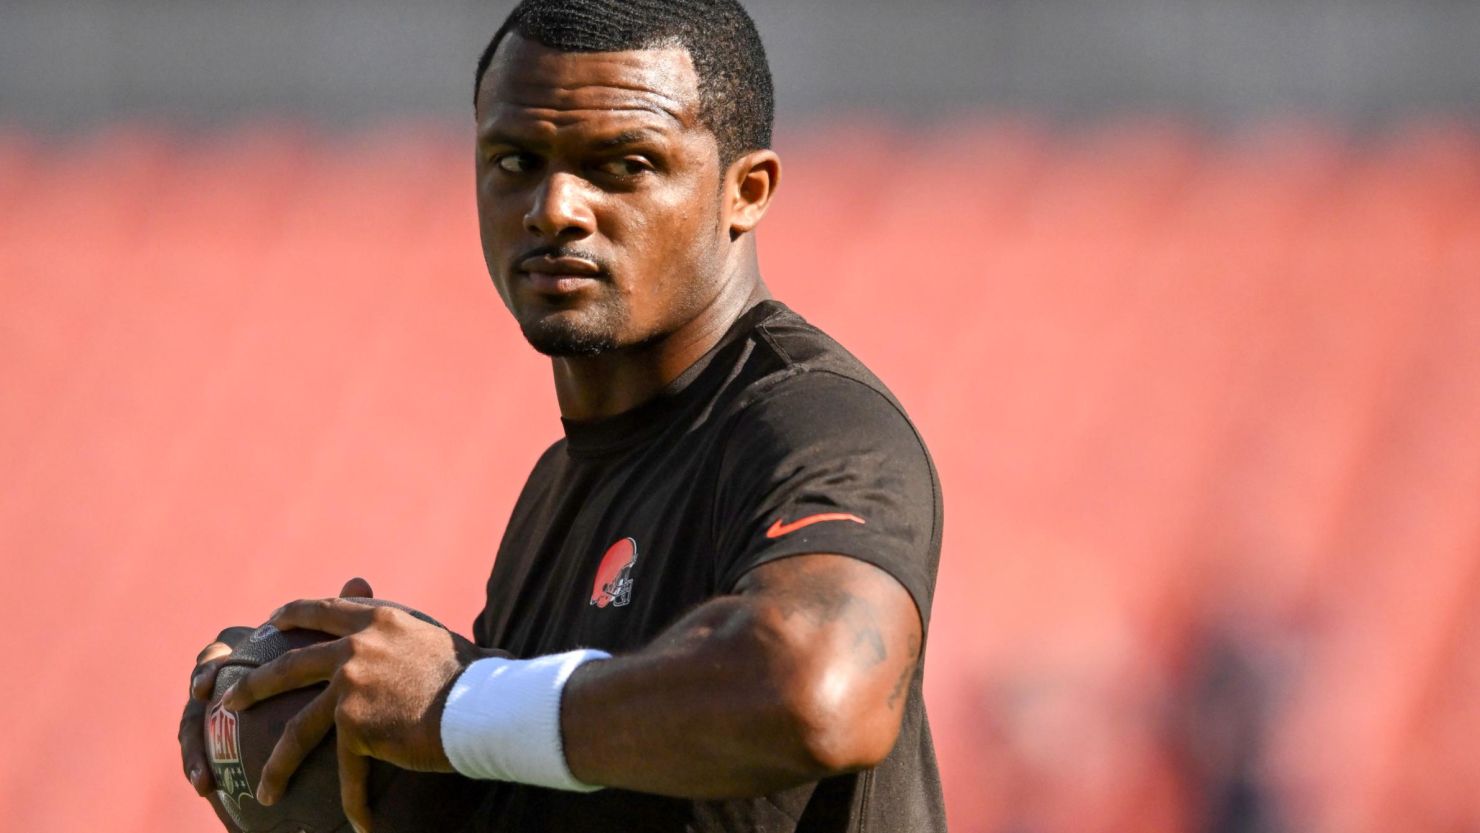 Deshaun Watson warms up prior to a preseason game between the Cleveland Browns and the Chicago Bears at FirstEnergy Stadium on August 27, 2022 in Cleveland, Ohio.